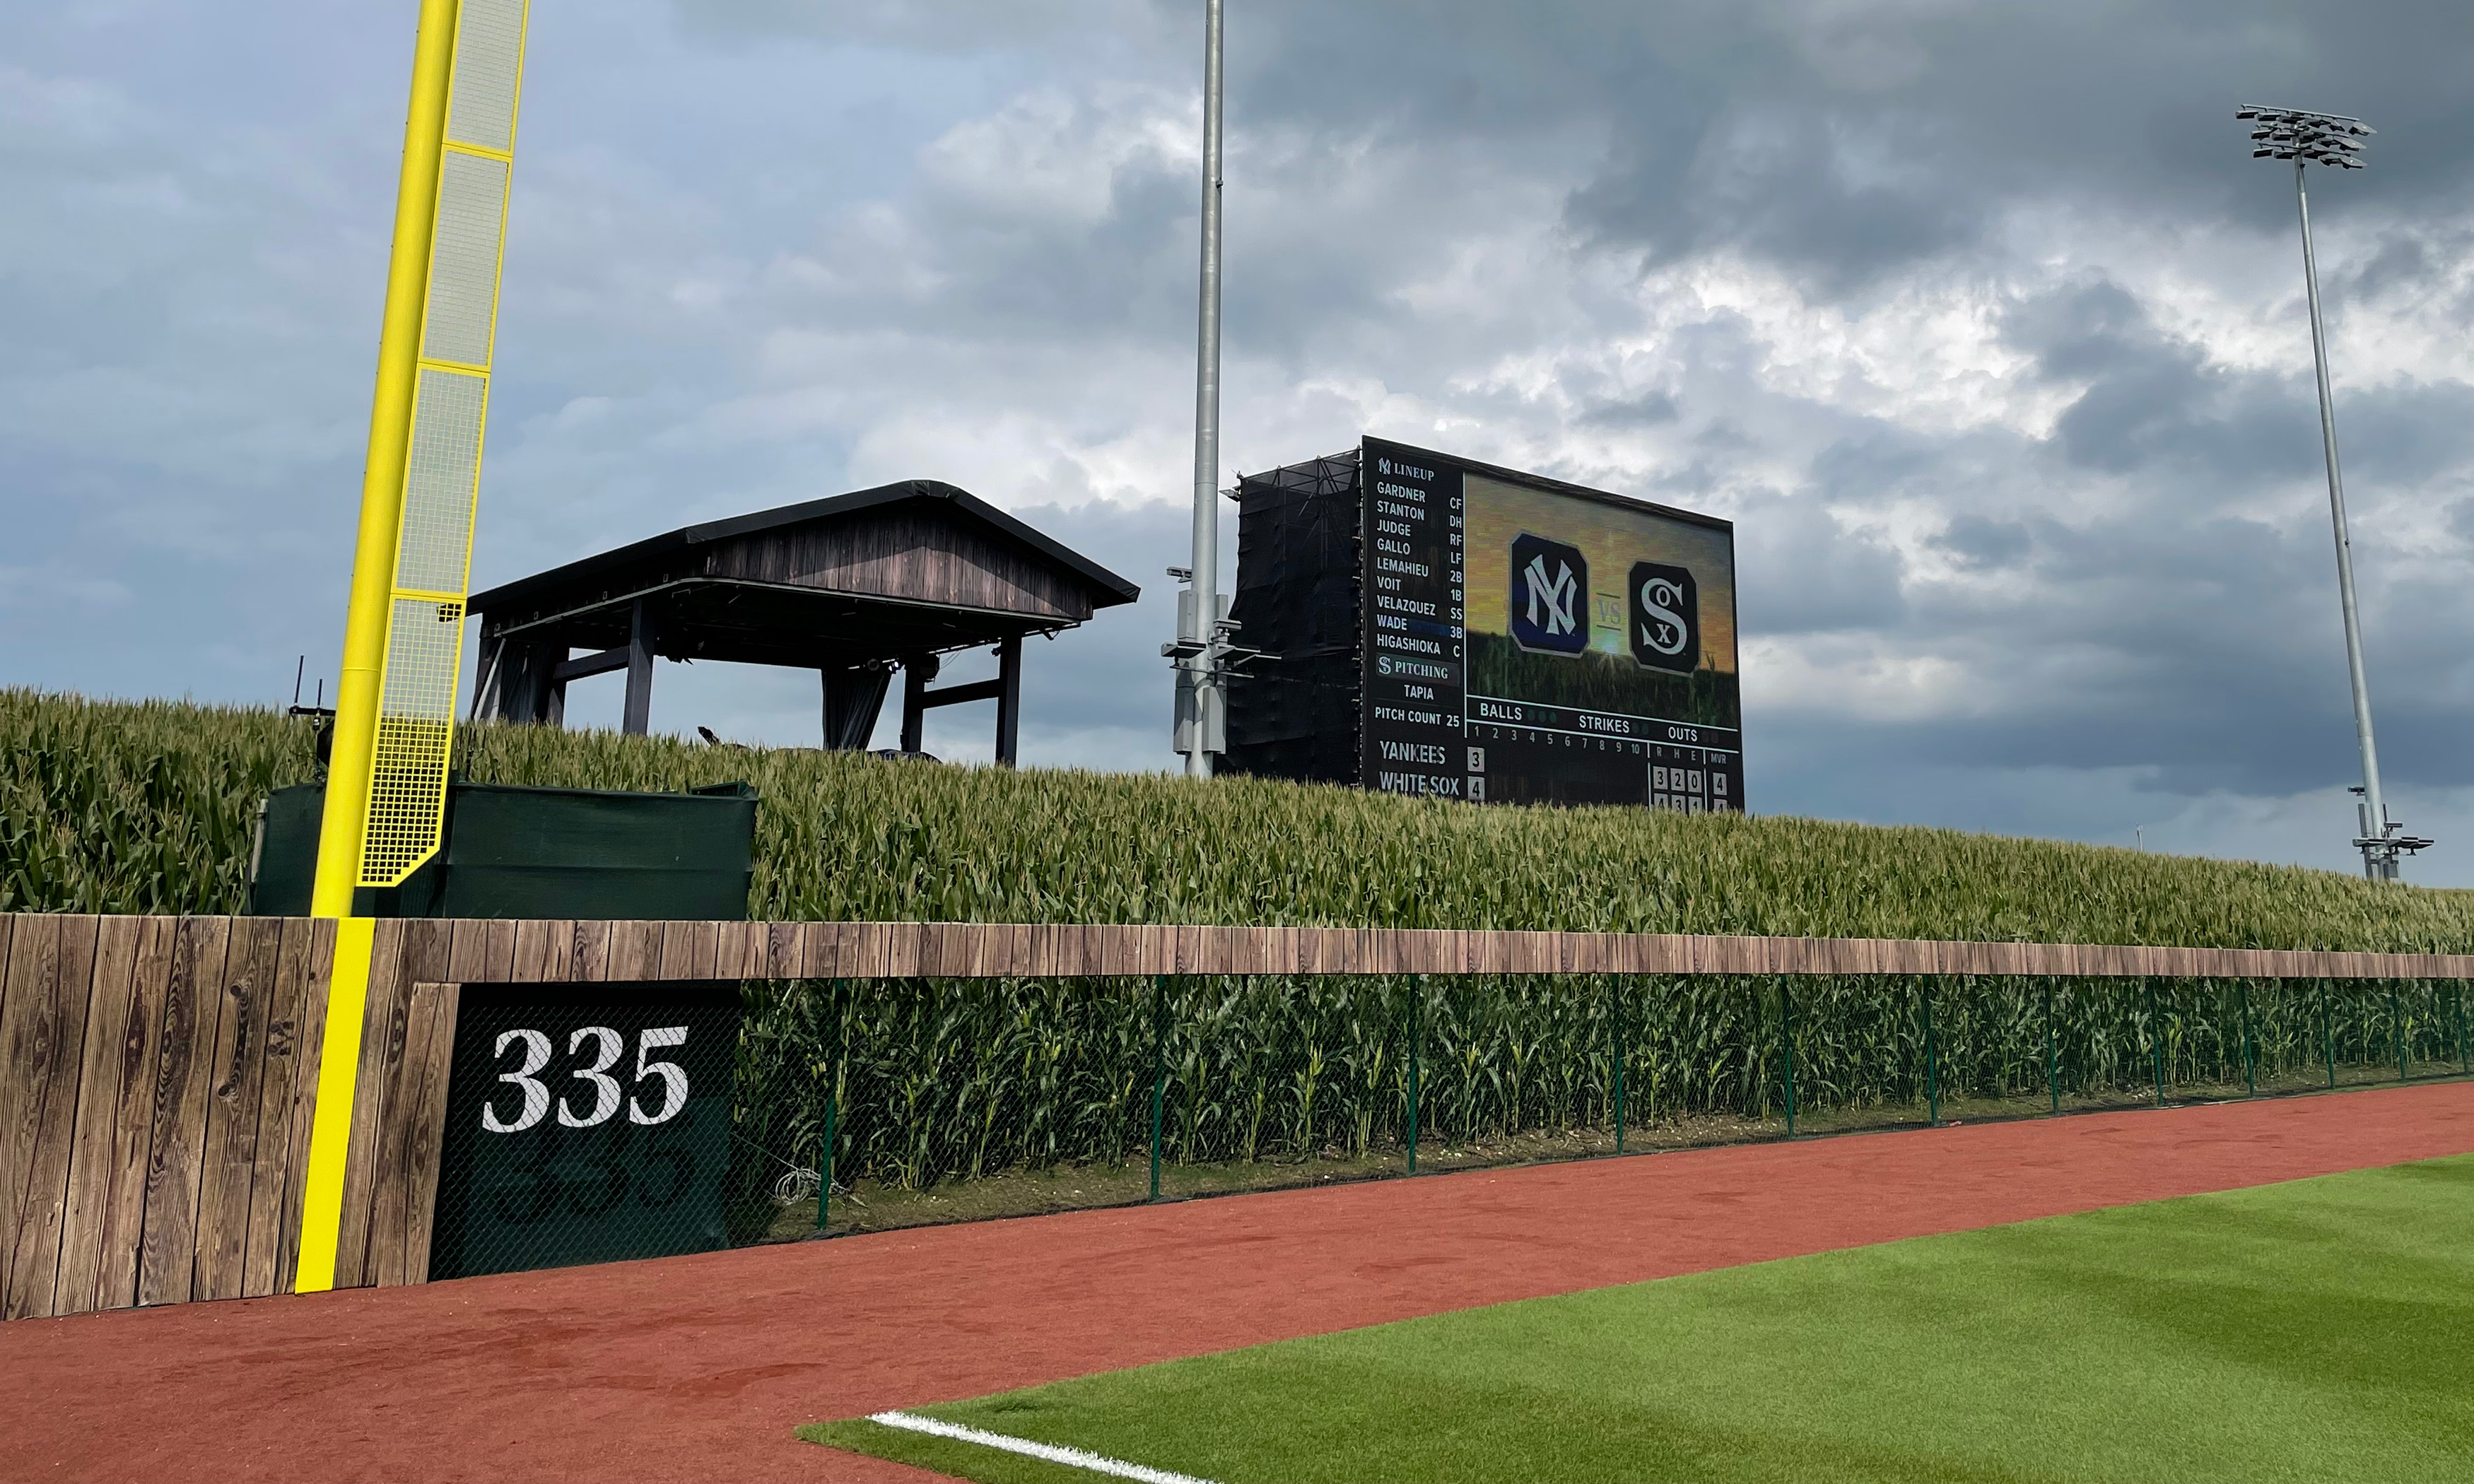 Field of Dreams' comes alive in Iowa: They built it, and MLB came